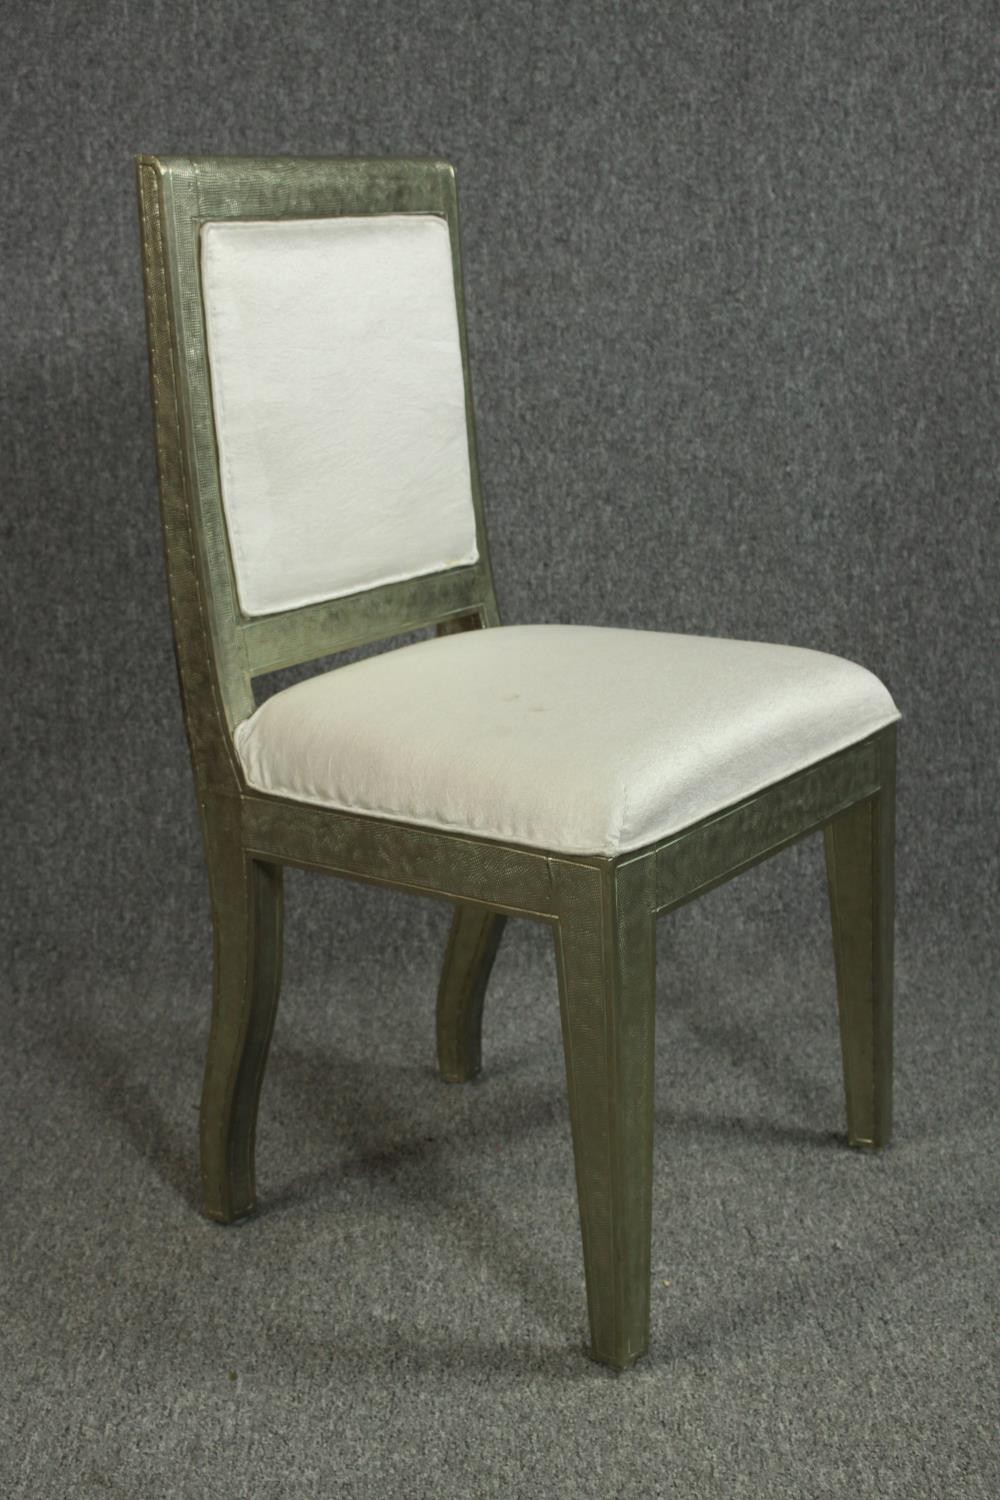 Dining chairs, contemporary with a lacquered finish. - Image 3 of 7